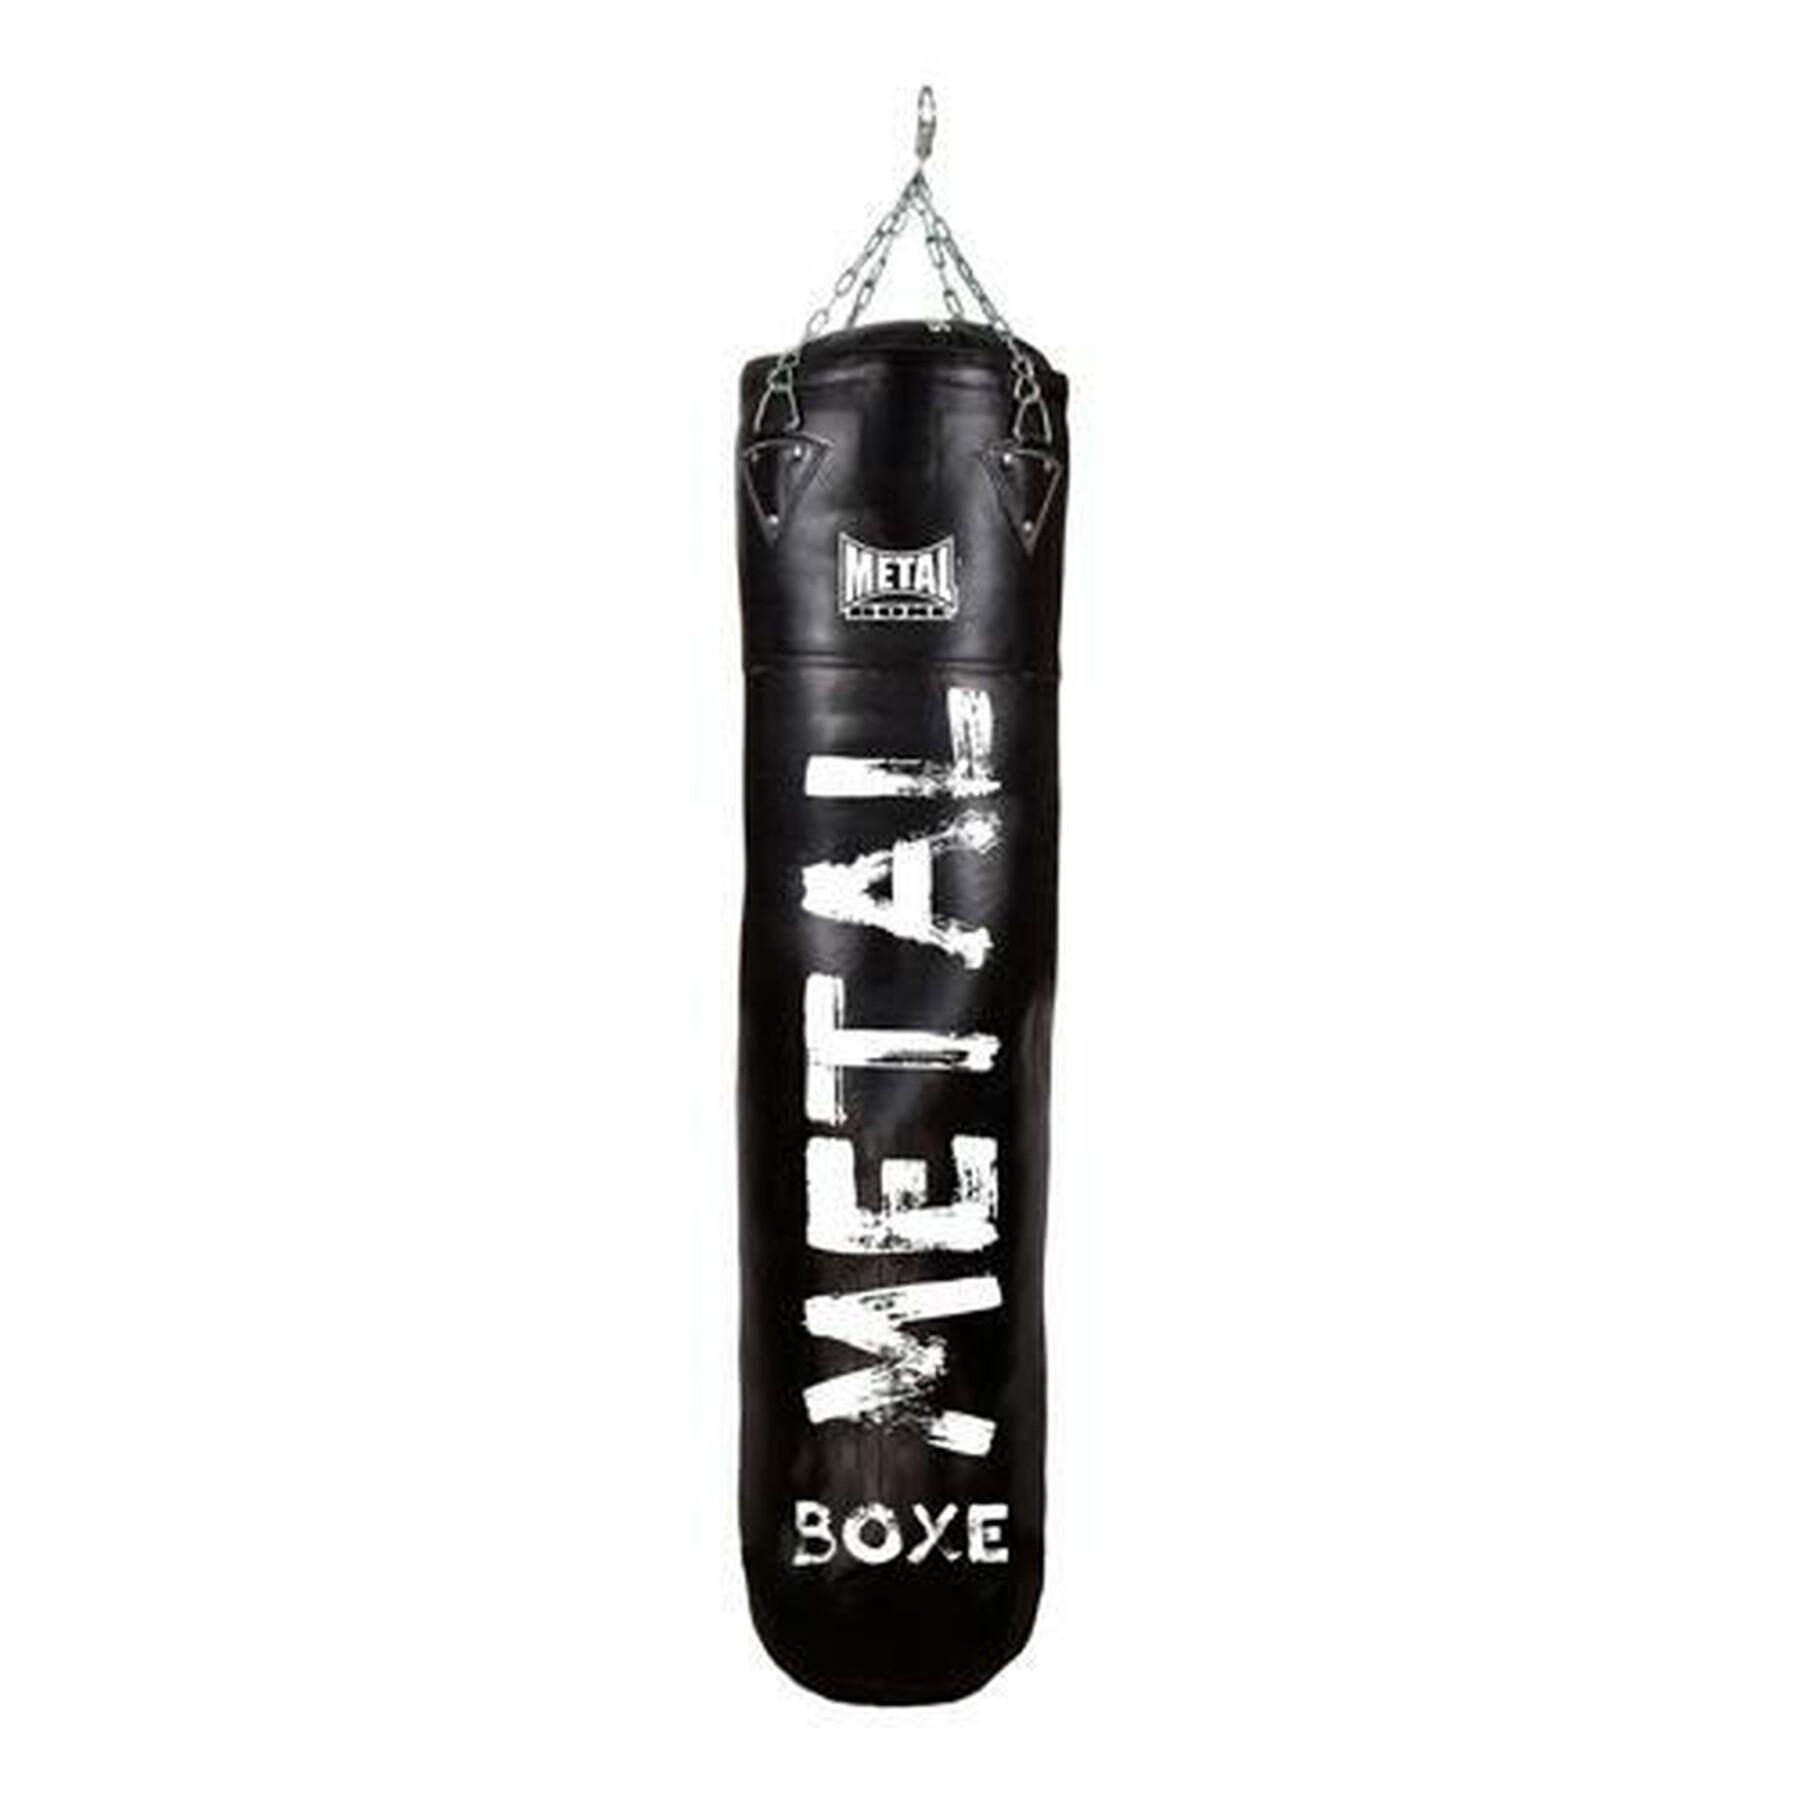 Leather punching bag Metal Boxe Heracles 120